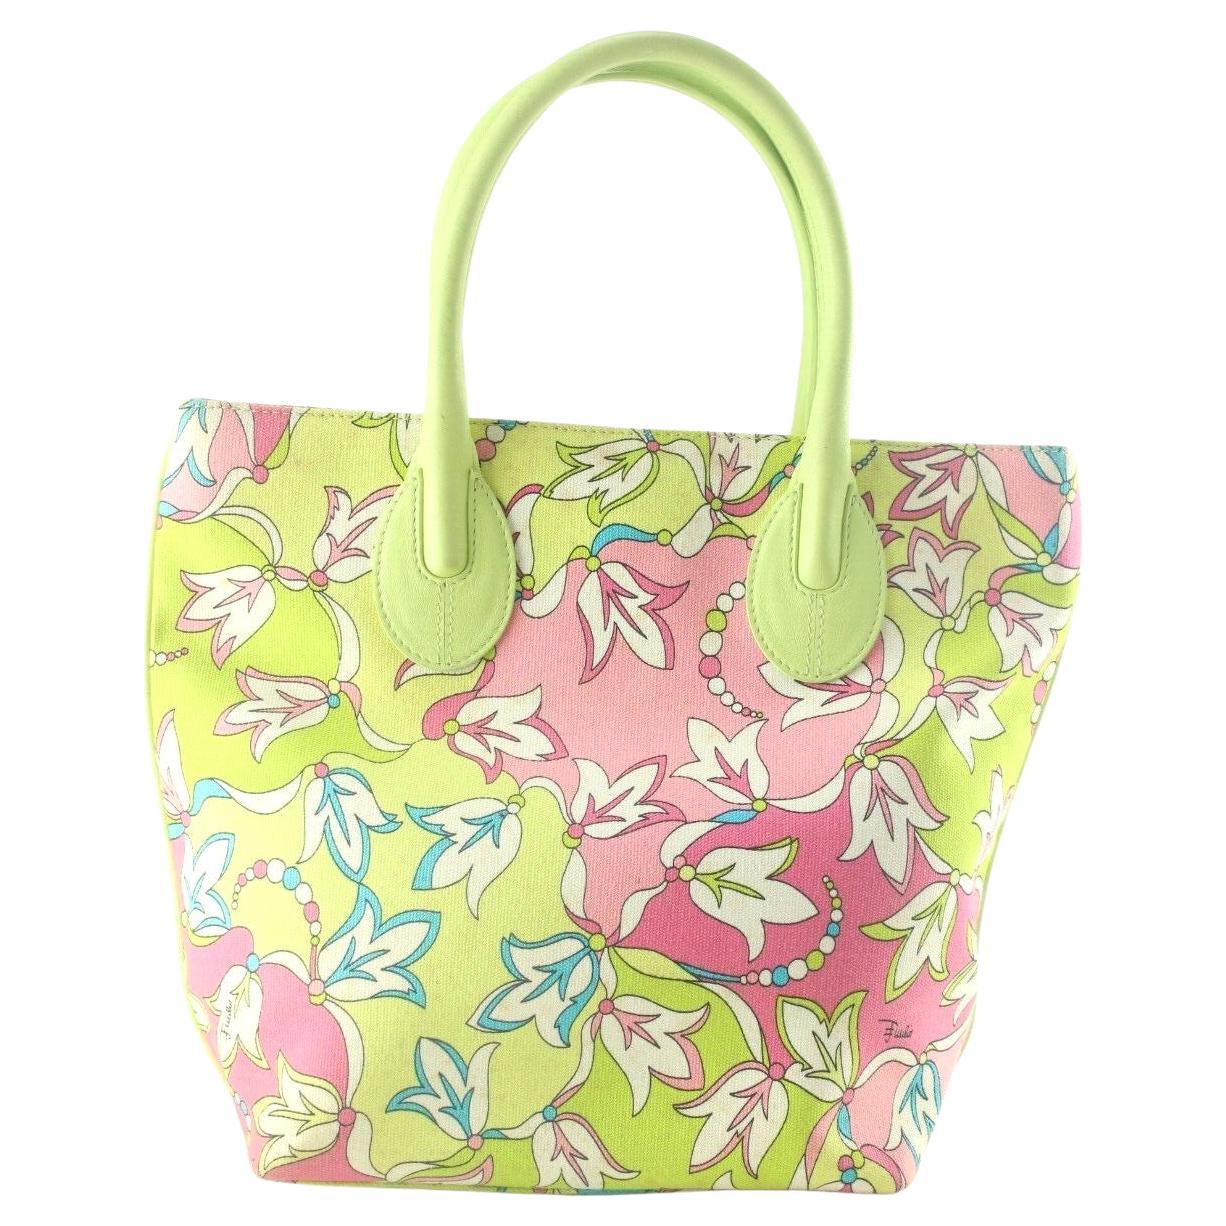 Emilio Pucci Green x Pink Floral Tote 1EP822K For Sale